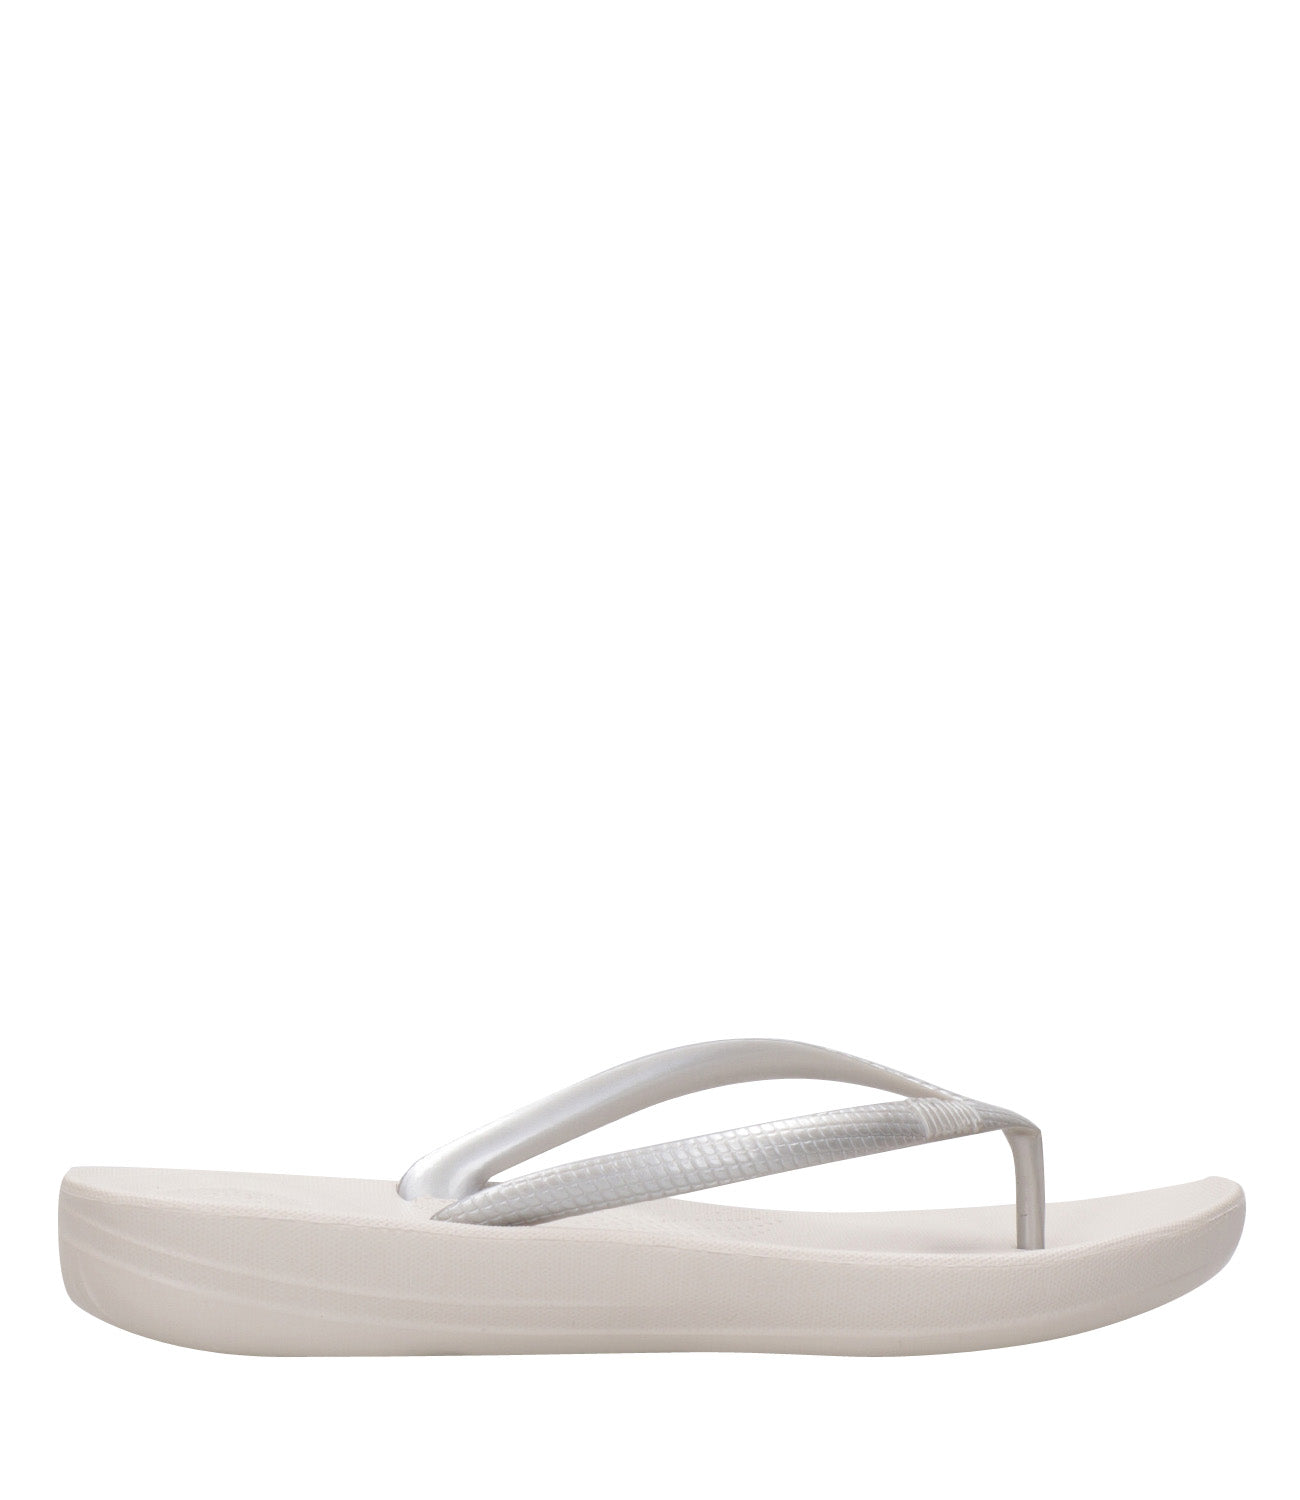 Fitflop | Infradito Inqushion Argento